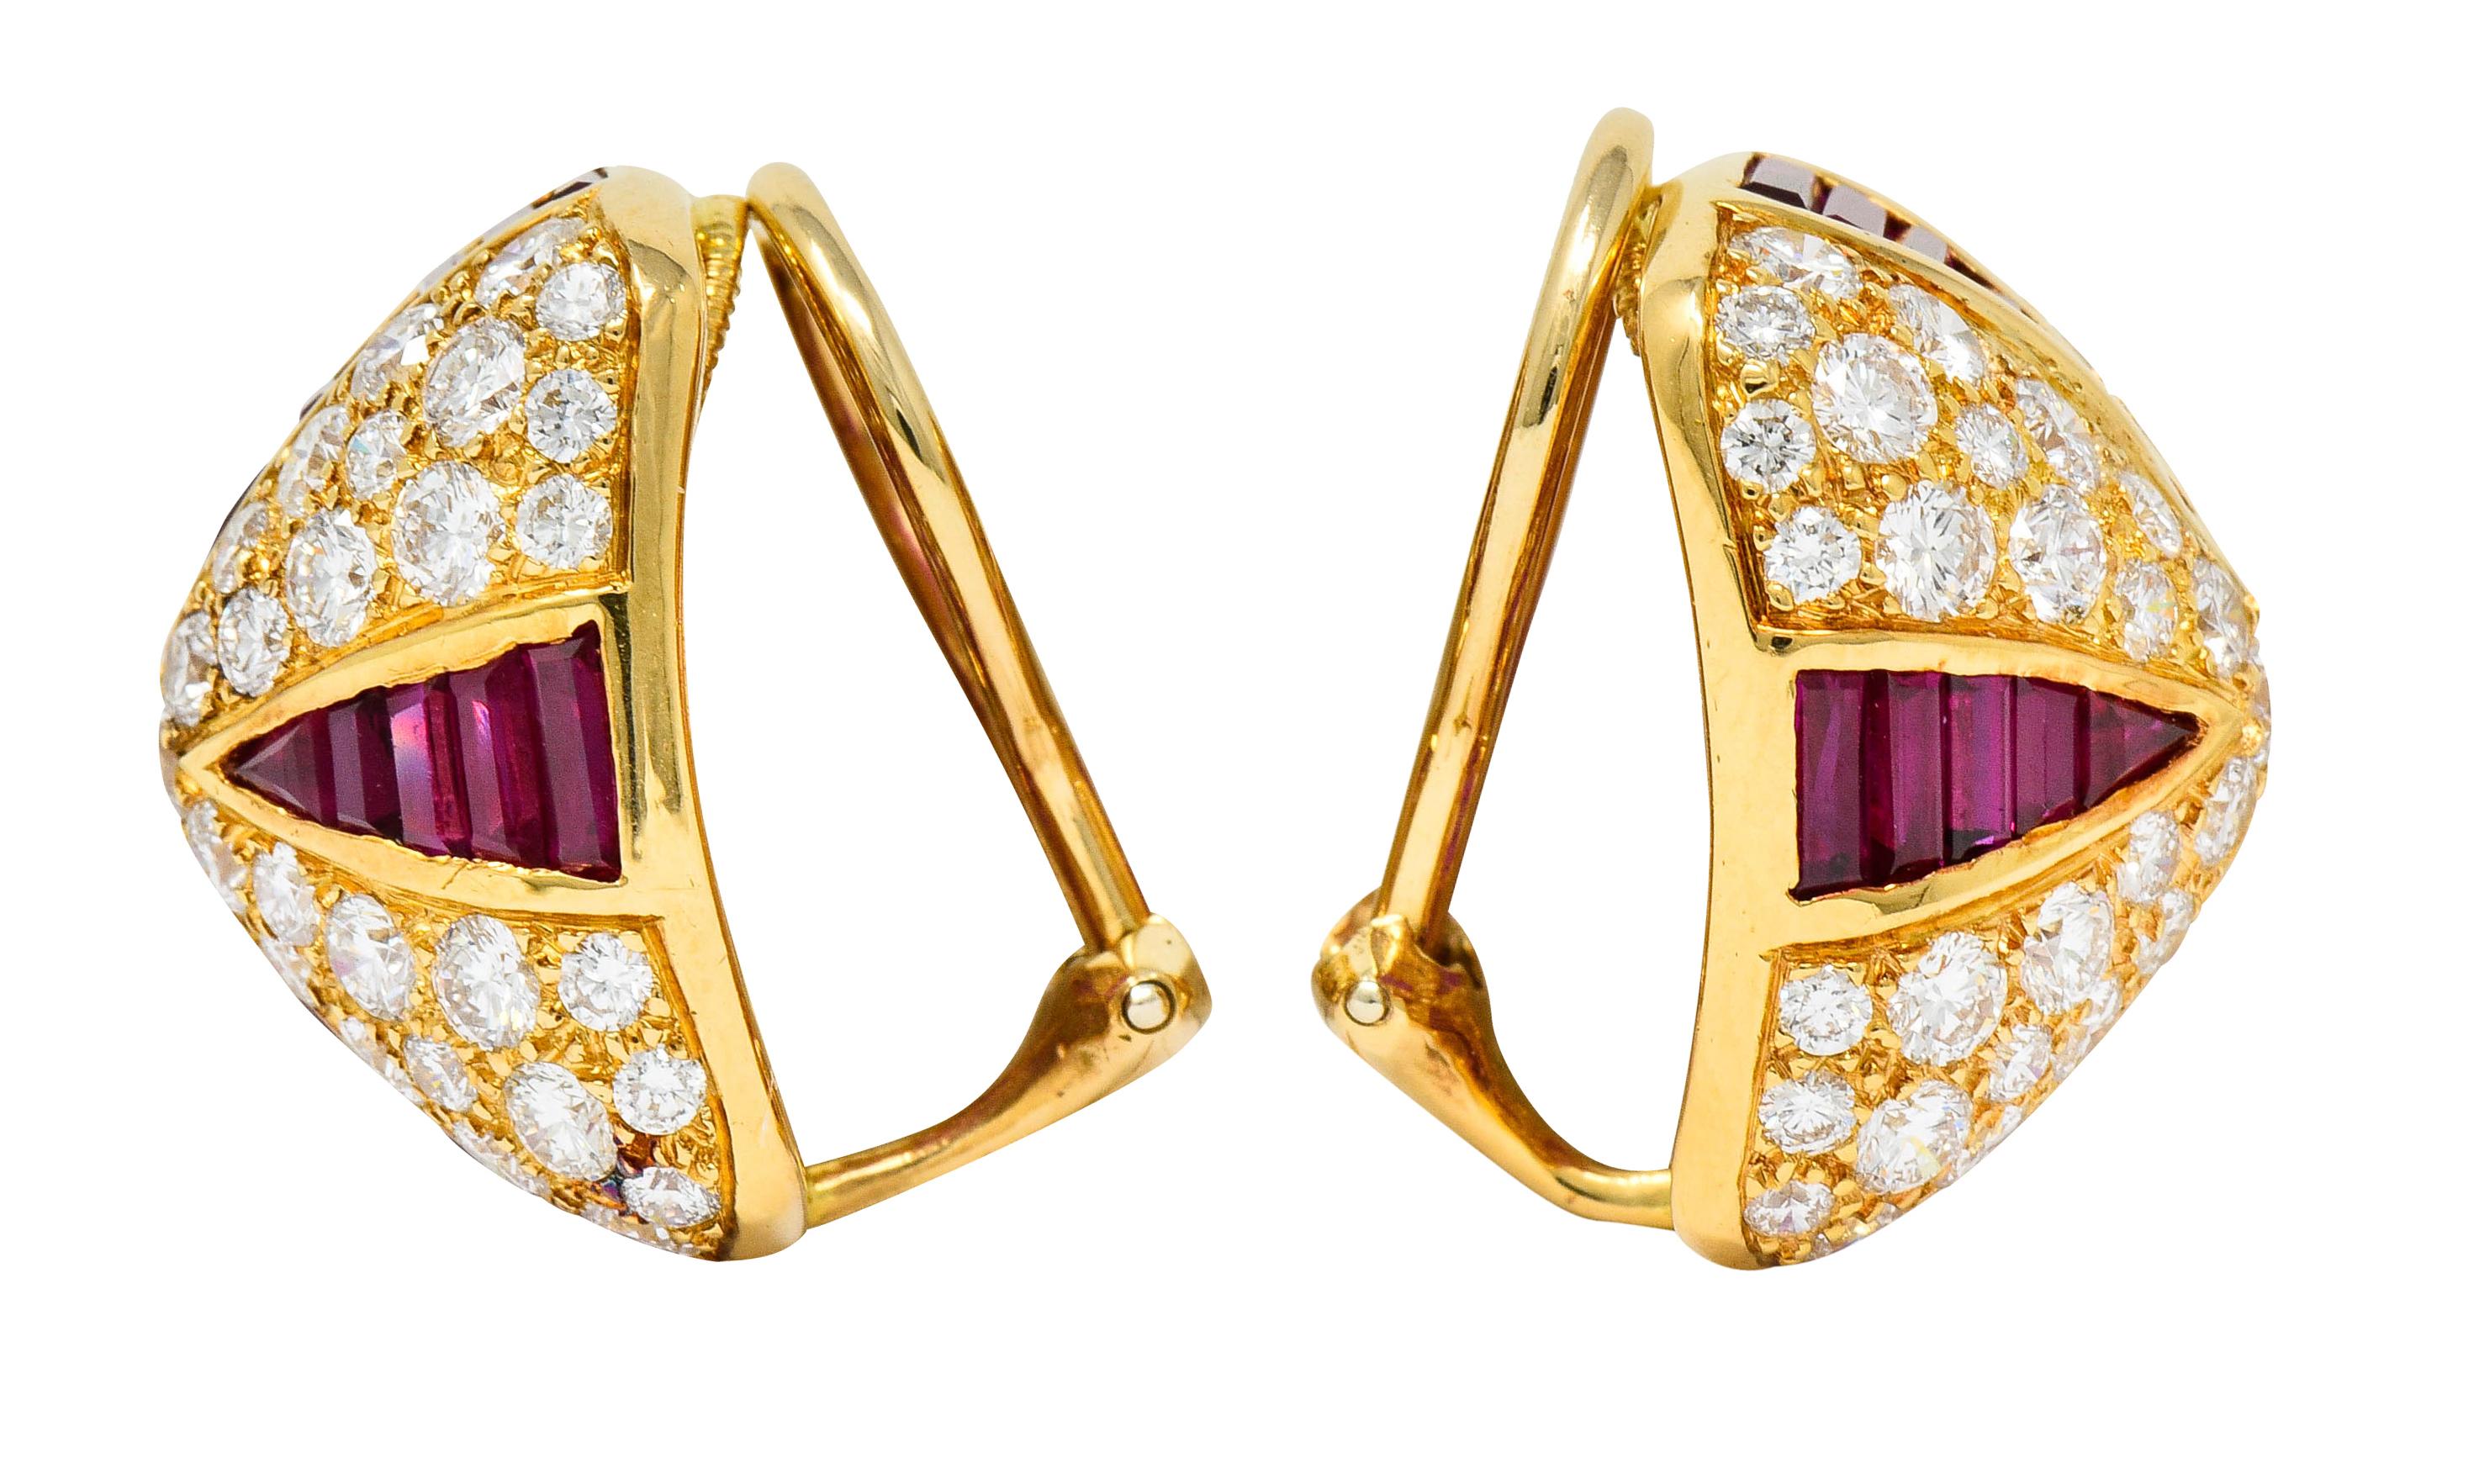 Ear-clips are designed as pyramidal forms

Pavè set throughout by round brilliant cut diamonds weighing in total approximately 4.31 carats; F/G color with VS clarity

Accented by triangular channels of calibrè cut rubies weighing approximately 4.71